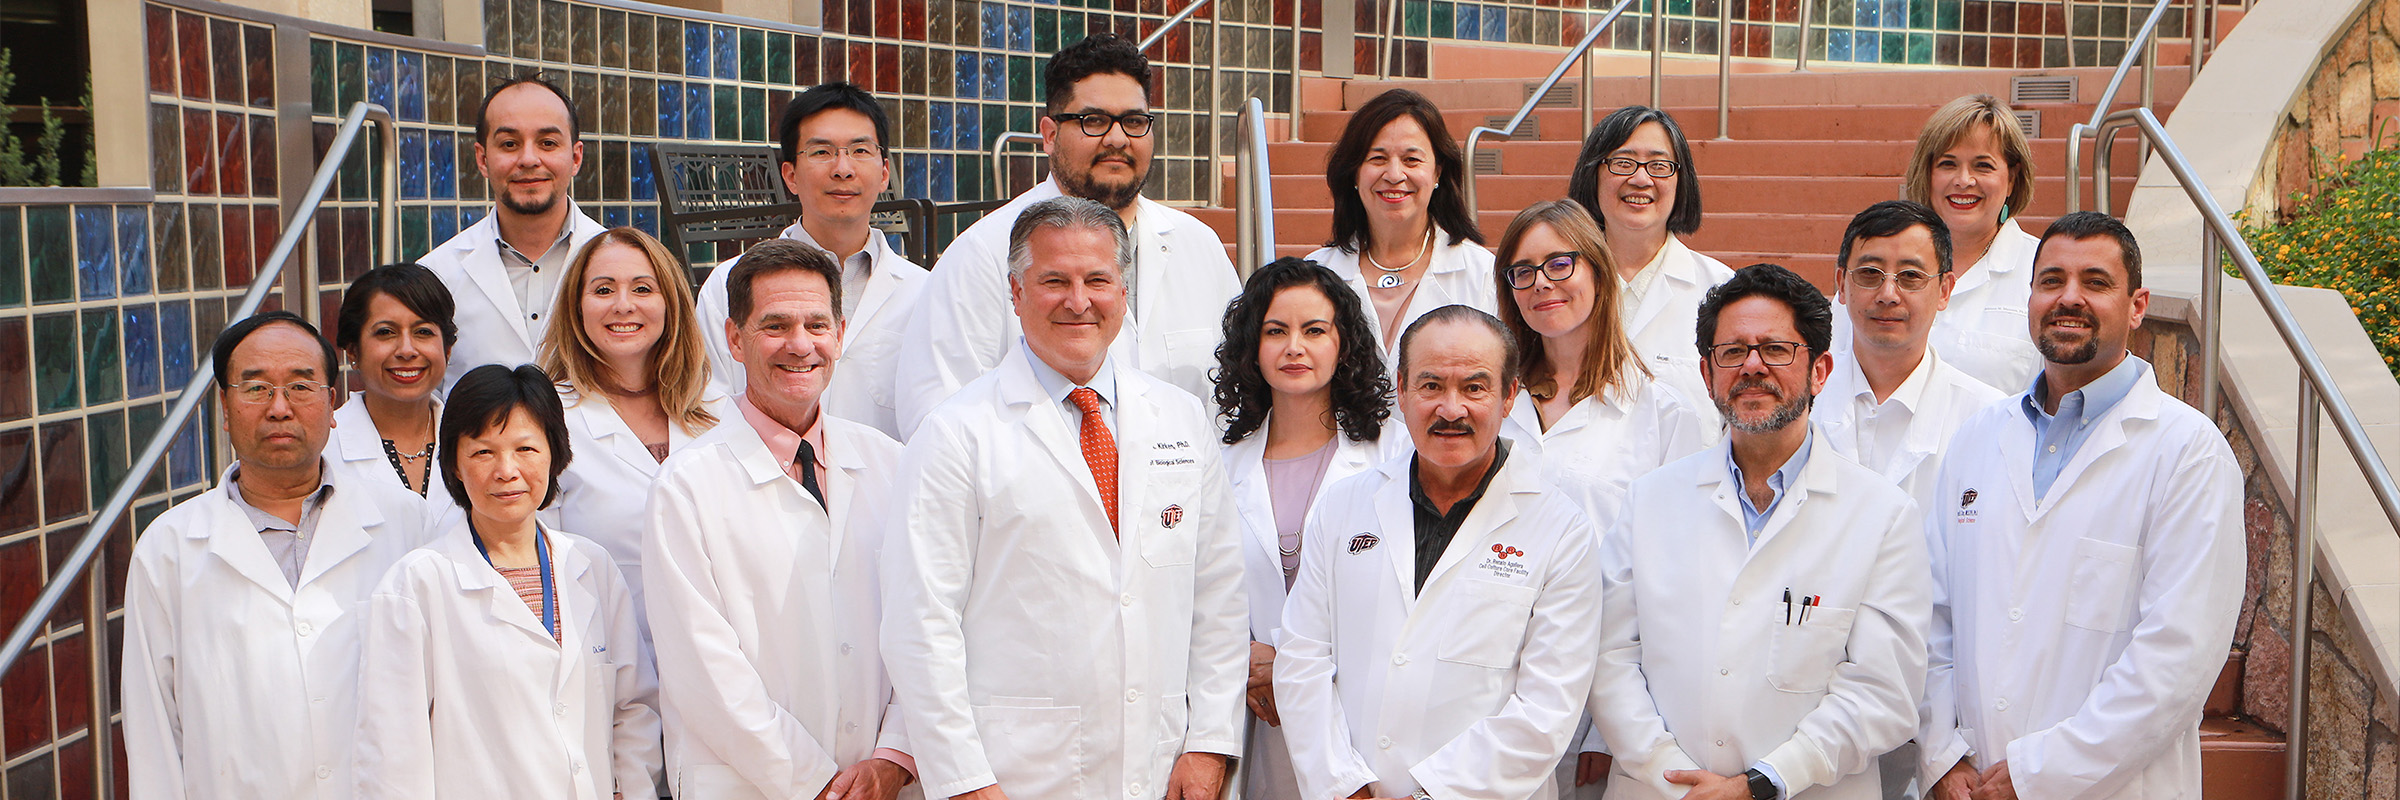 UTEP Receives $19M to Study Cancer Affecting Mexican-Americans 